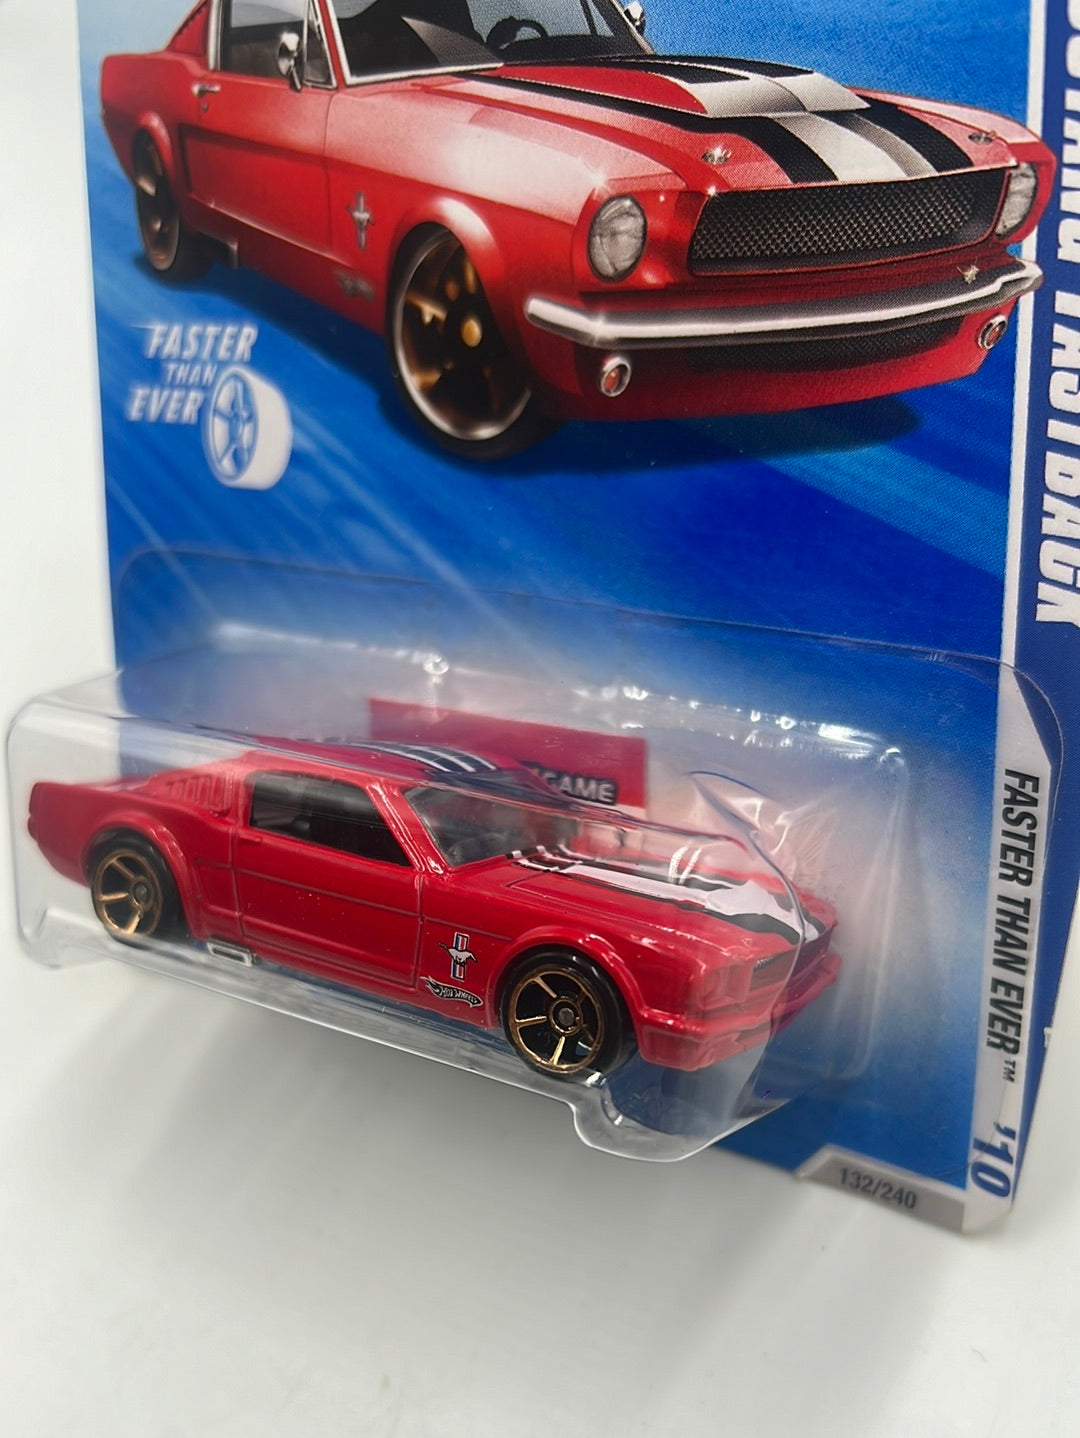 2010 Hot Wheels Faster Than Ever Ford Mustang Fastback Red Keys to Speed 132/240 25H